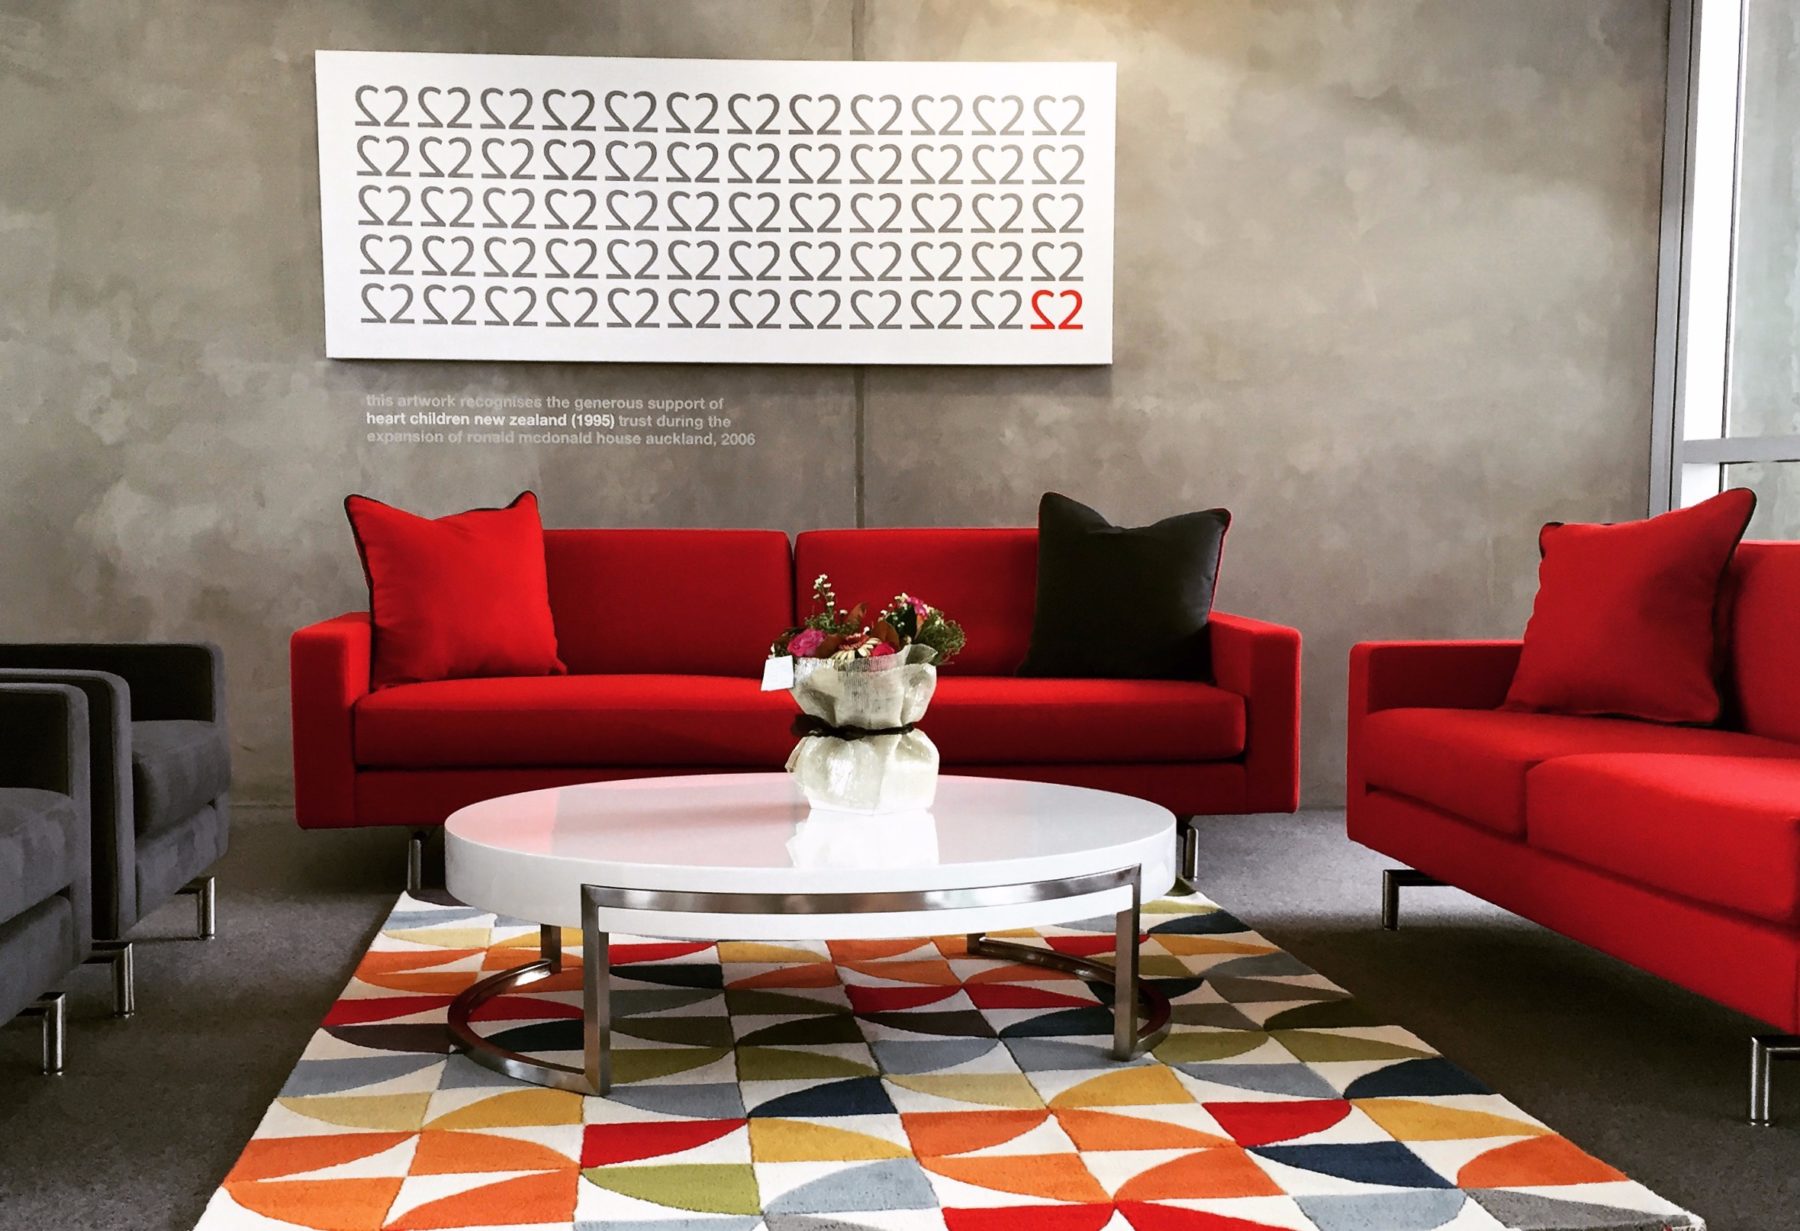 ronald mcdonald house living room setting with colourful geometric rug, red couches and concrete walls